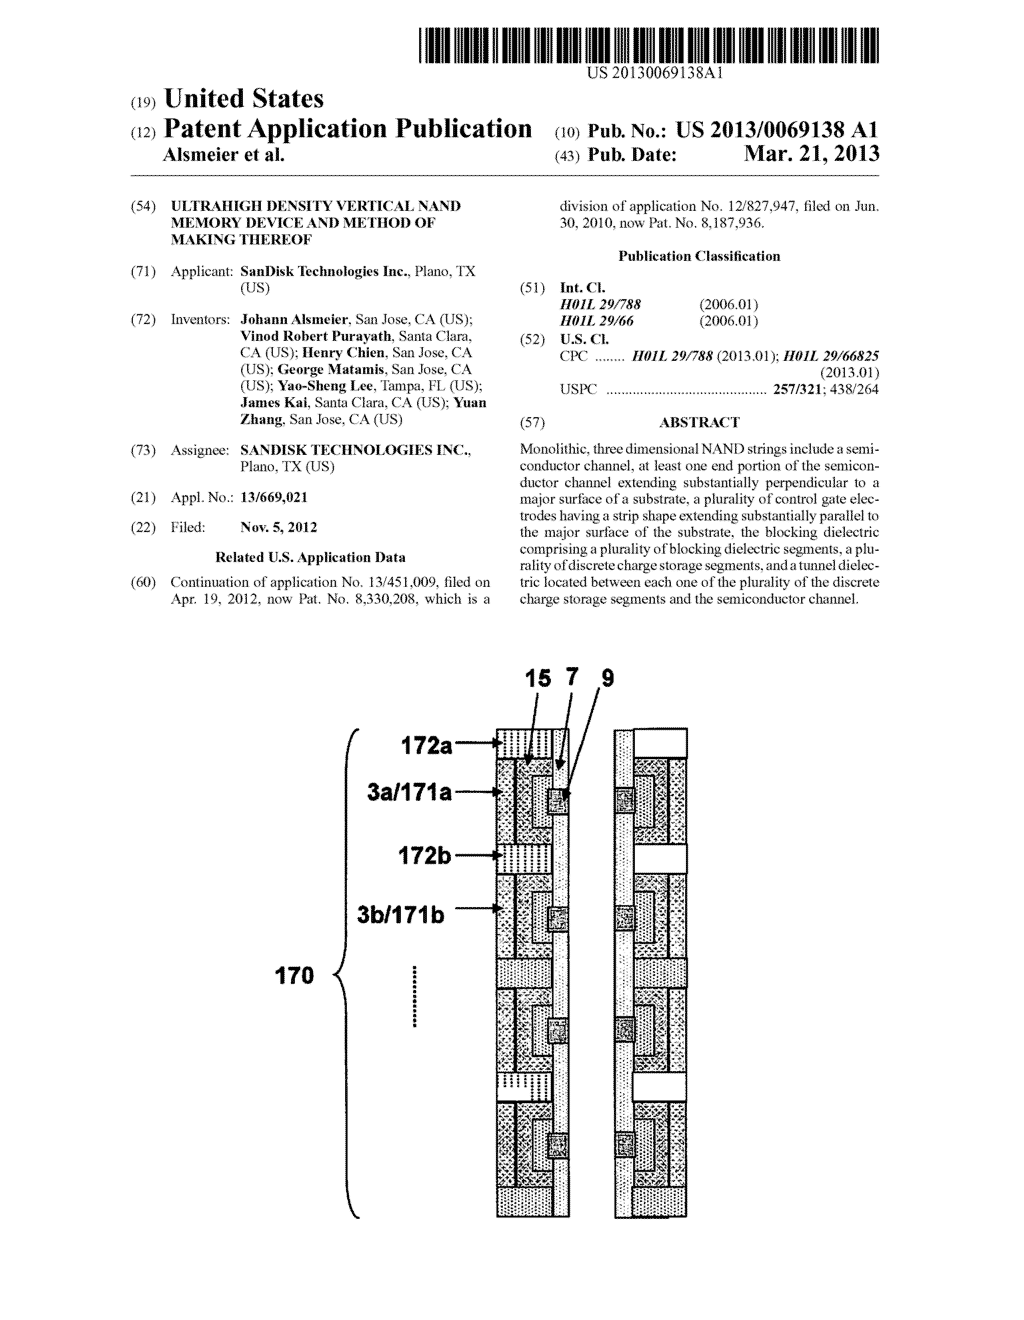 ULTRAHIGH DENSITY VERTICAL NAND MEMORY DEVICE AND METHOD OF MAKING THEREOF - diagram, schematic, and image 01